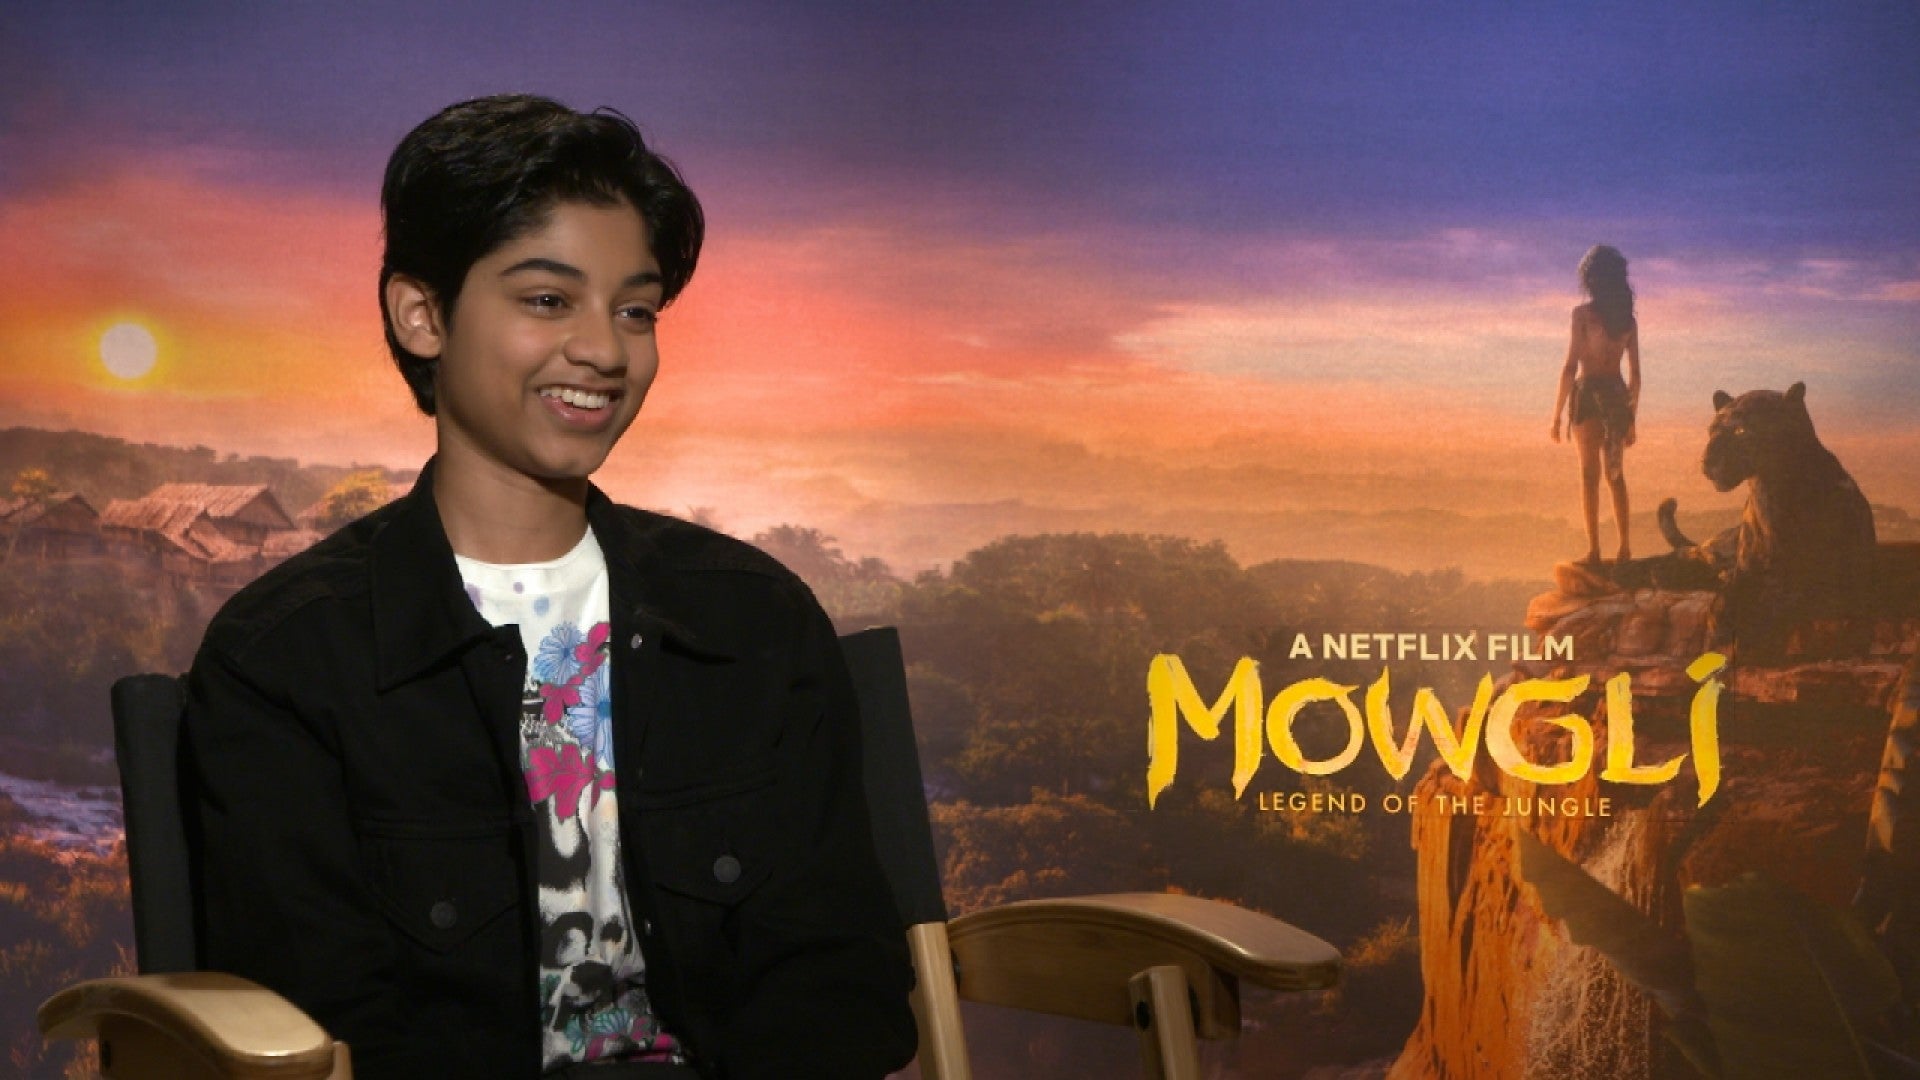 Mowgli' Star Rohan Chand Stayed at a Wolf Sanctuary to Prepare for Role (Exclusive)